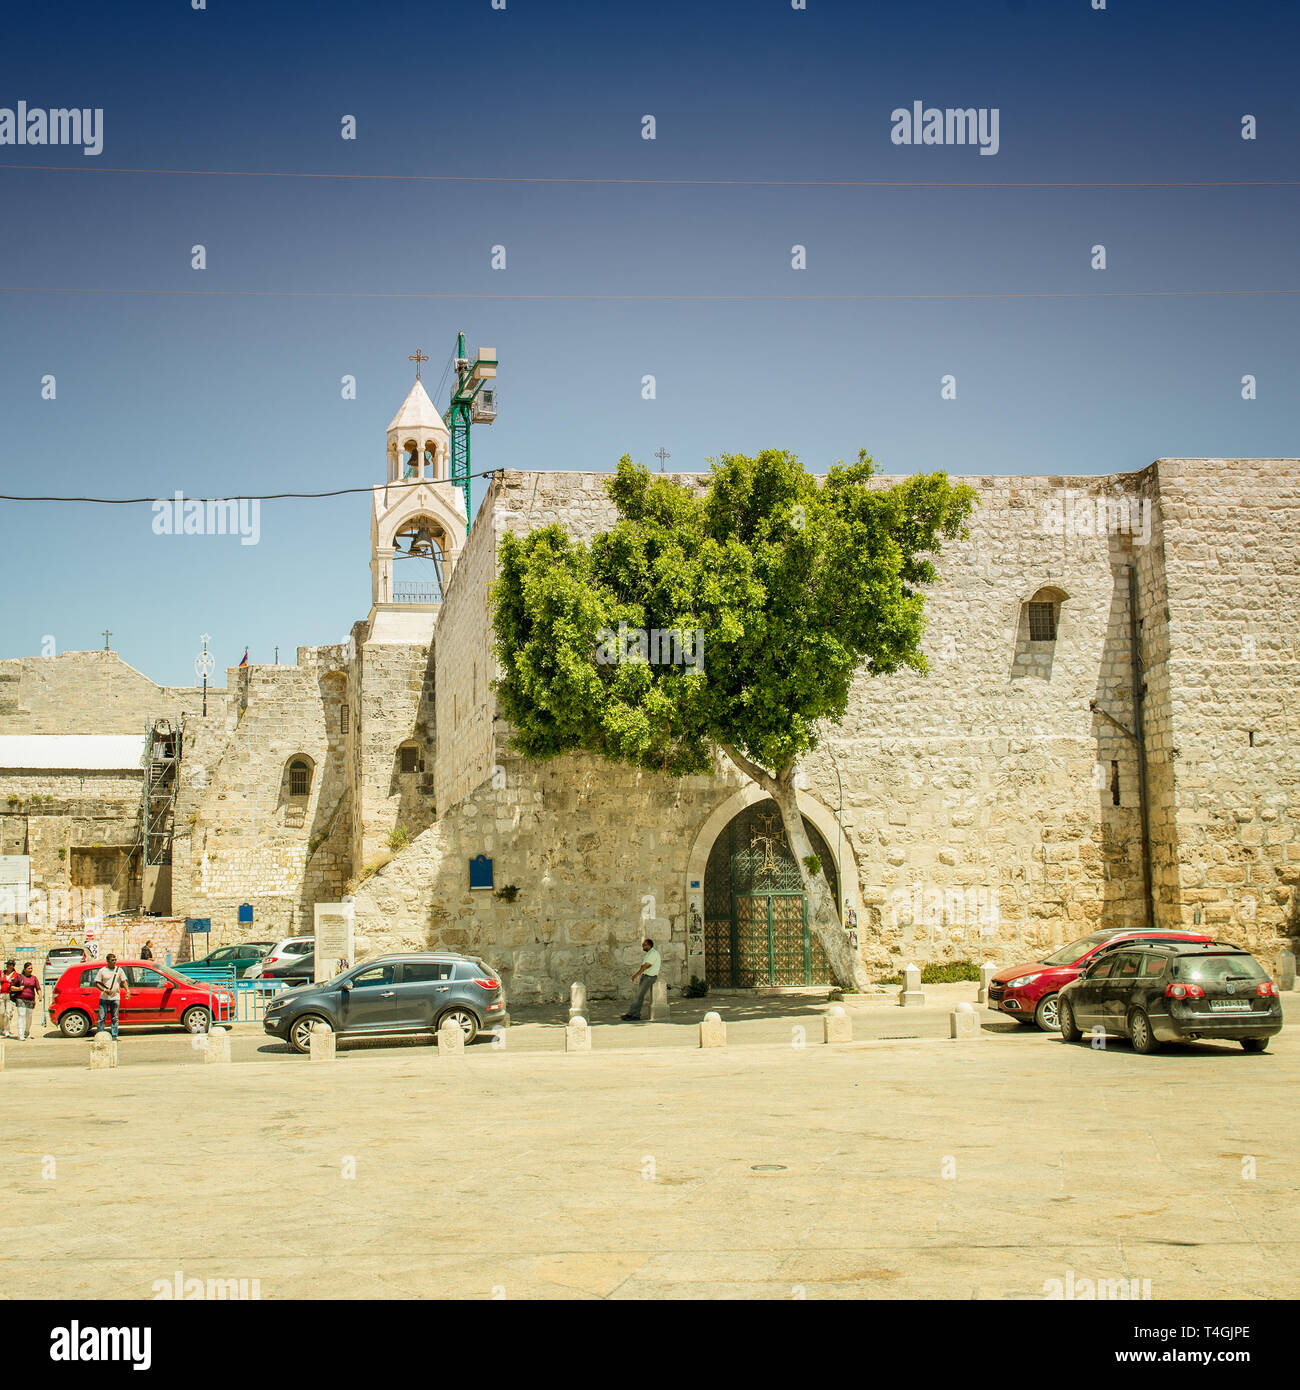 BETHLEHEM, PALESTINE - JUNE 2, 2015: The Church of the Nativity is a basilica located in Bethlehem Stock Photo